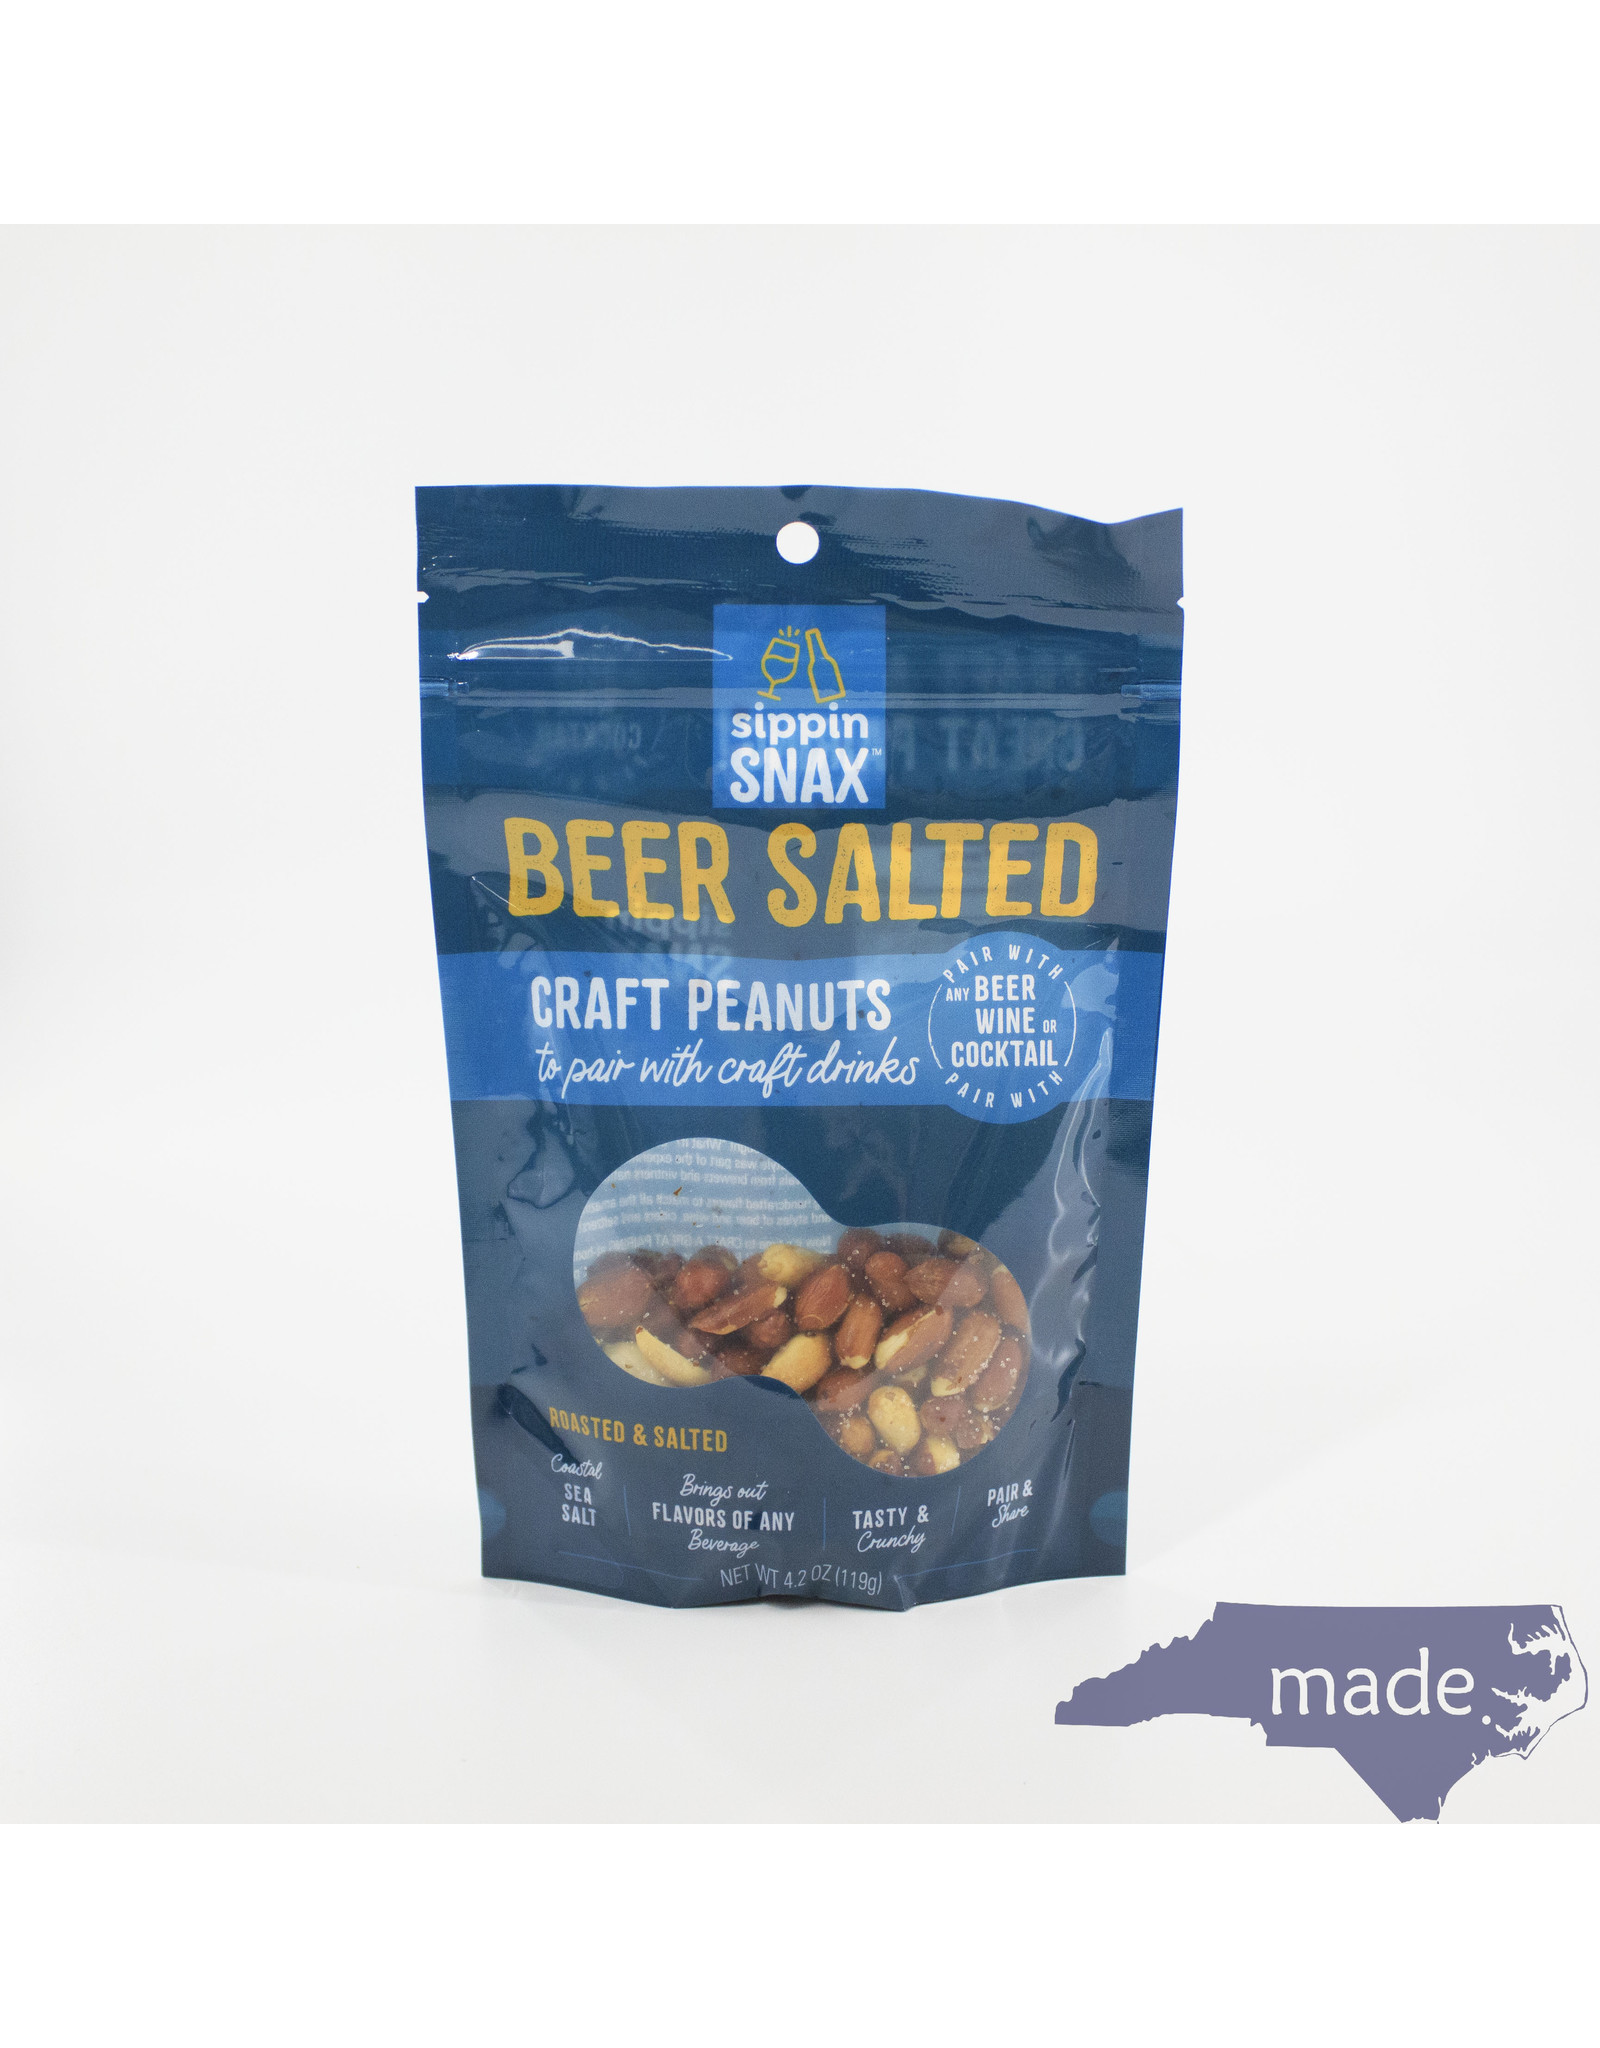 Sippin Snax Beer Salted Craft Peanuts - Sippin Snax